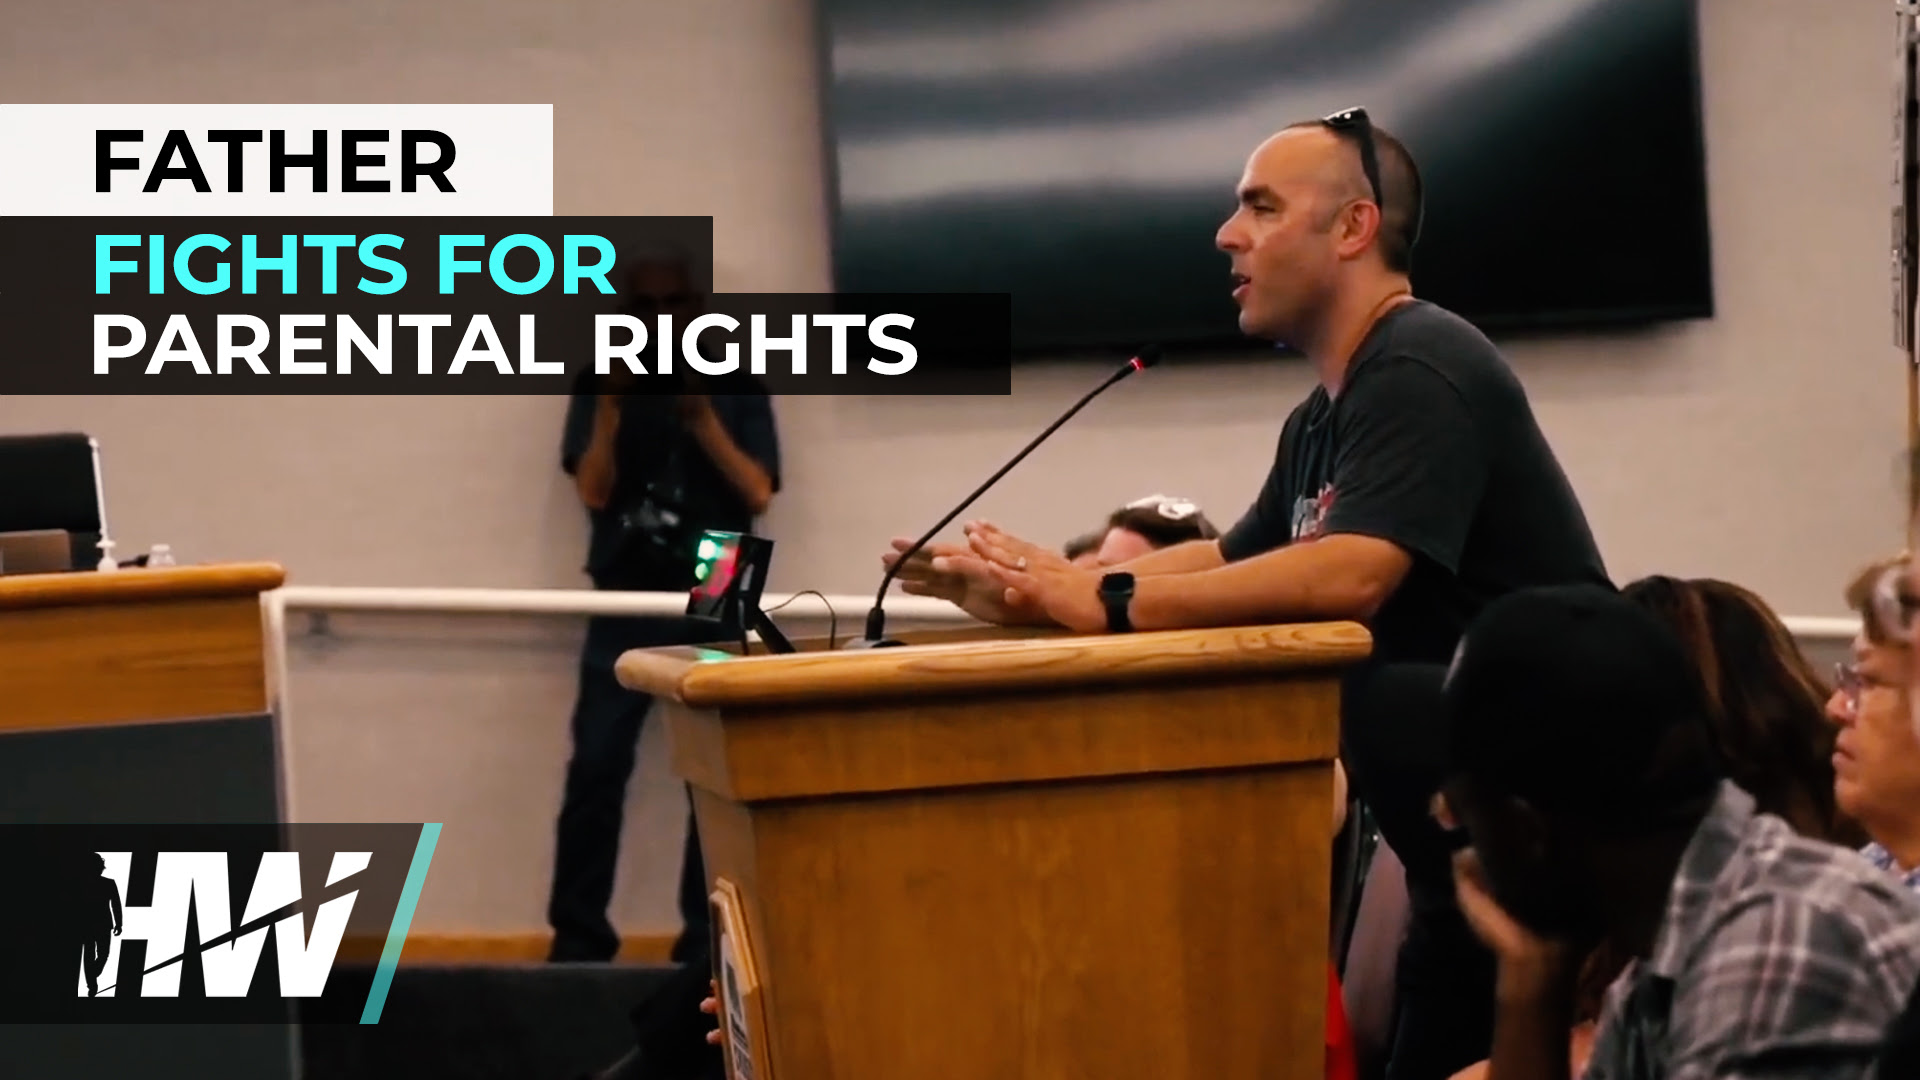 FATHER
                                  FIGHTS FOR PARENTAL RIGHTS